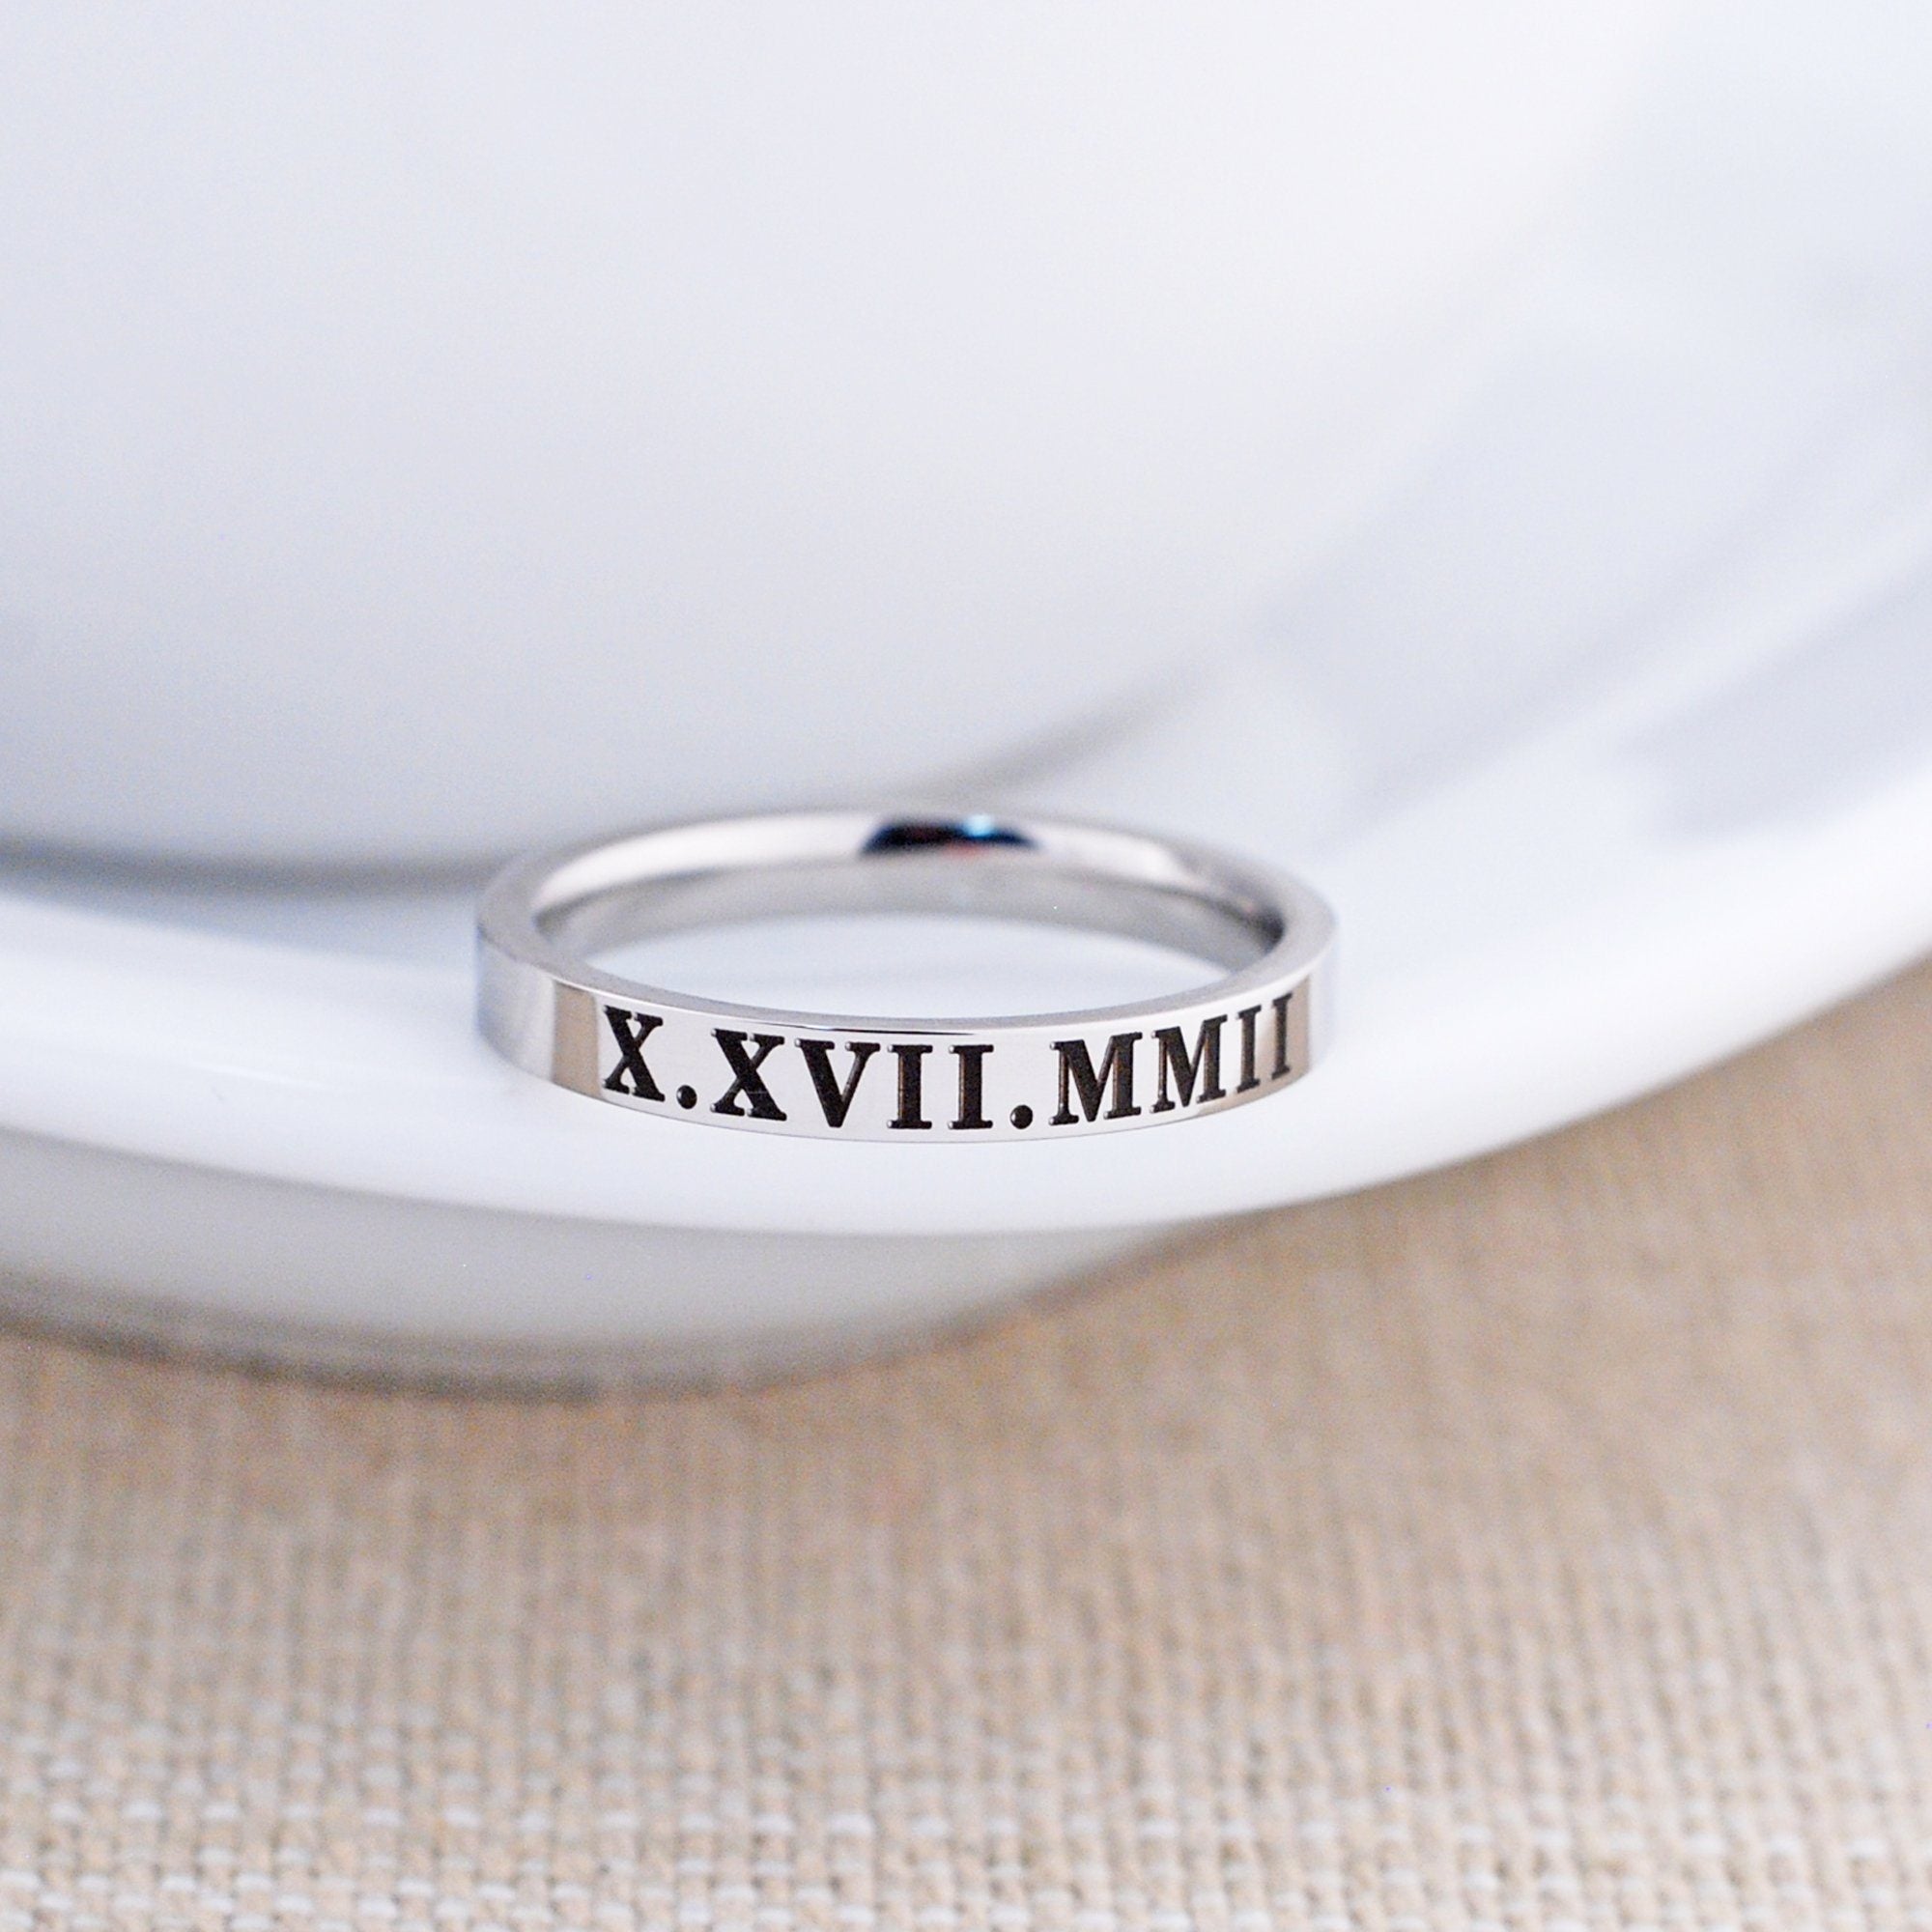 Buy Roman Numeral Ring by Caitlyn Minimalist Personalized Name Ring Minimal  Anniversary Ring Custom Handmade Jewelry Gift for Him RM03 Online in India  - Etsy